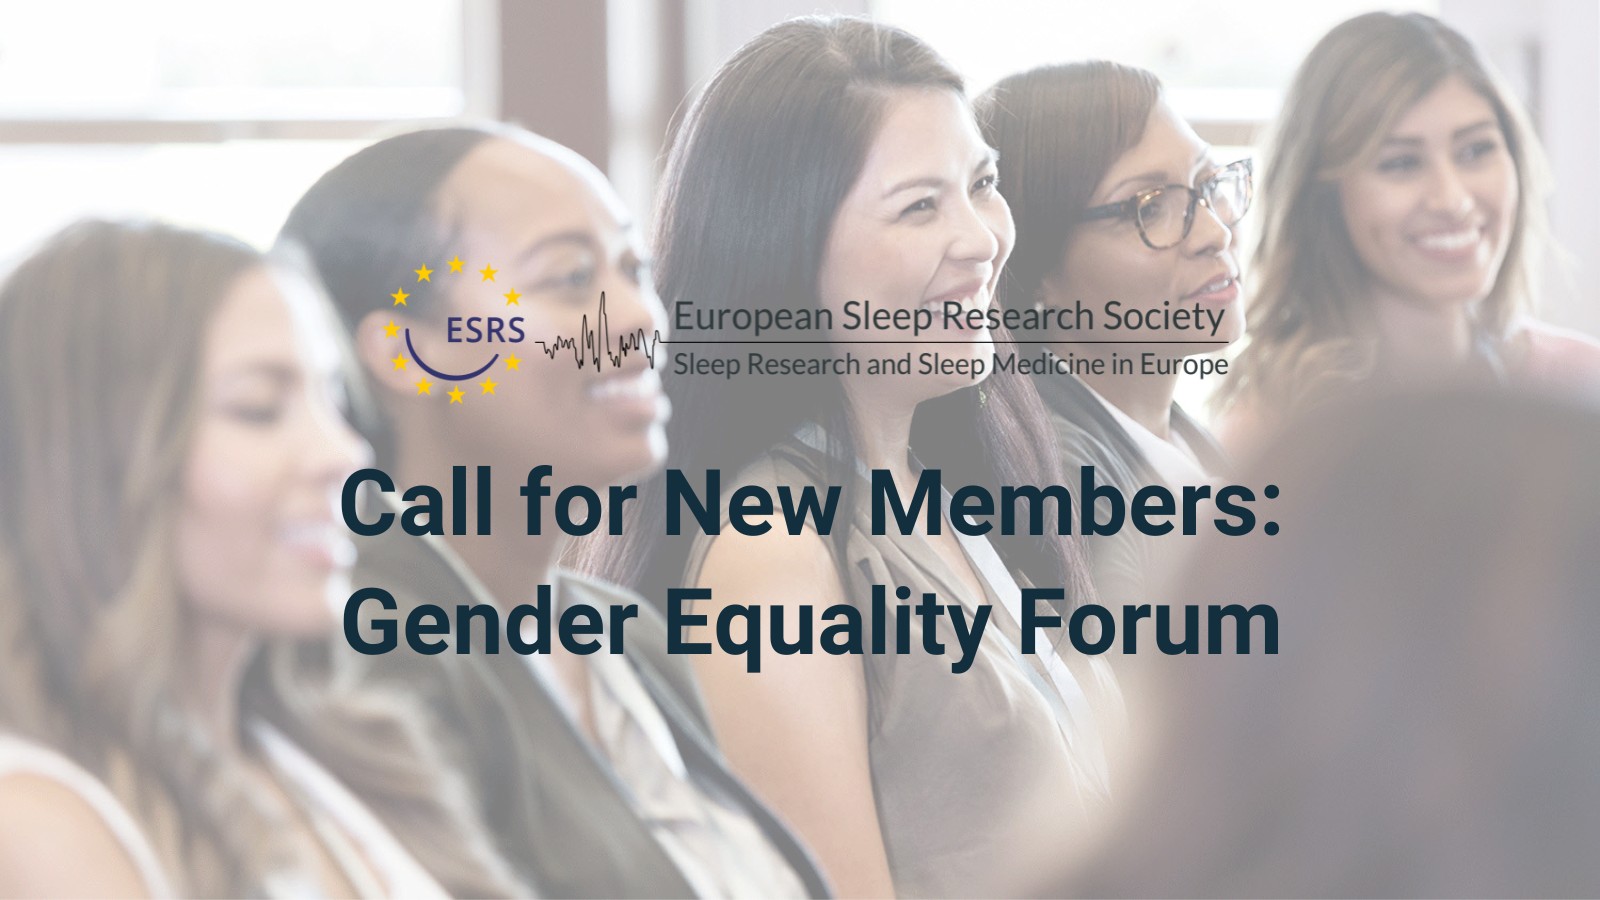 ESRS GEF gender equality forum call for members